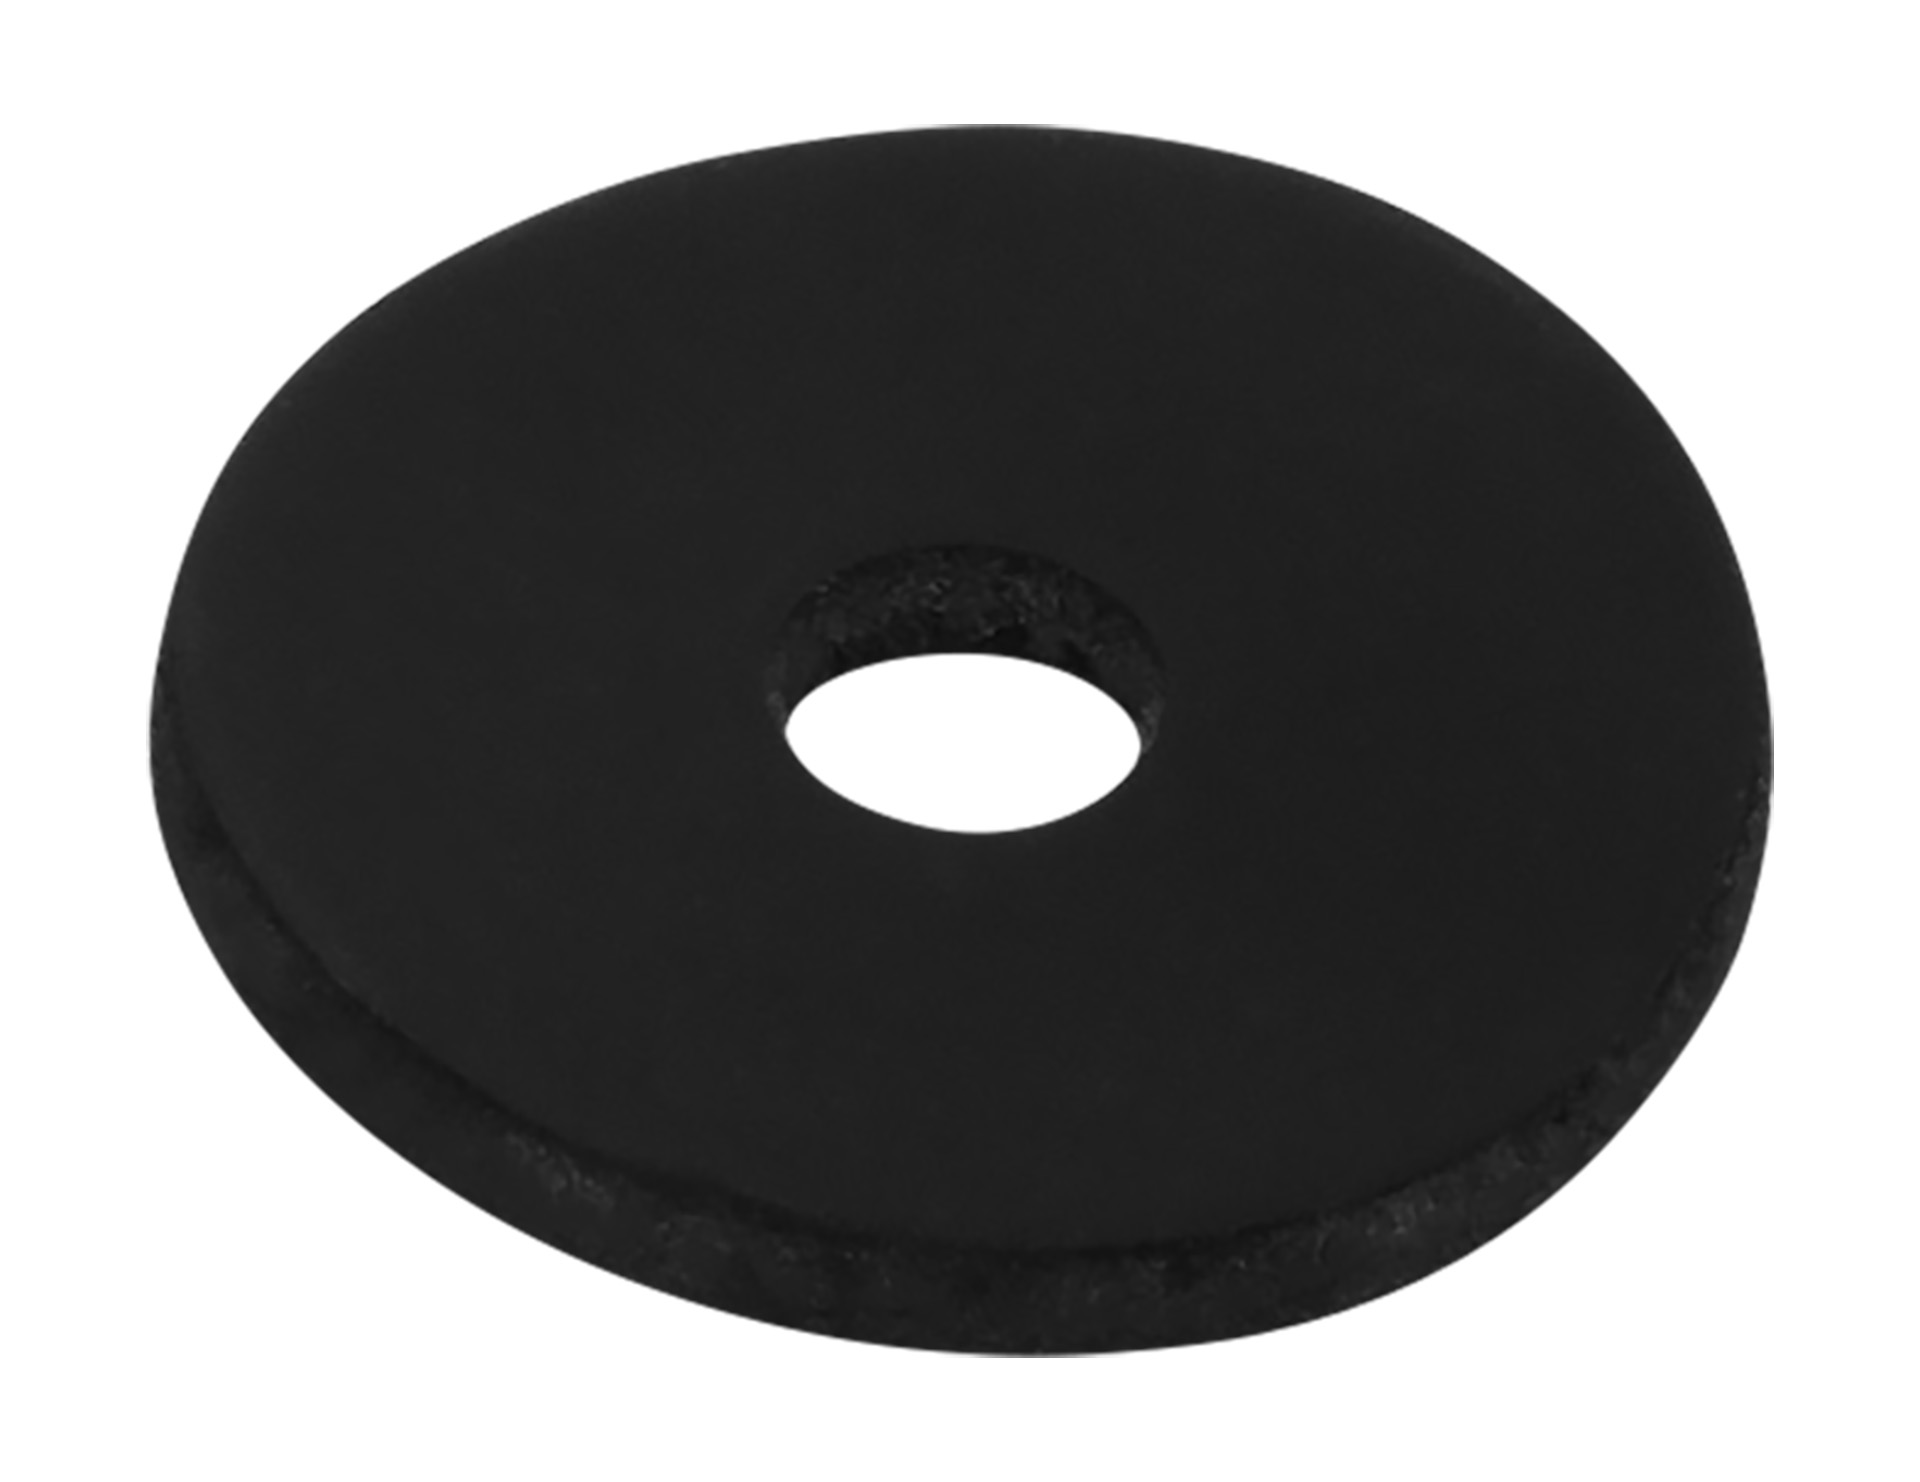 RockStand - Replacement Rubber Gasket for Microphone Stand (RS 20700)